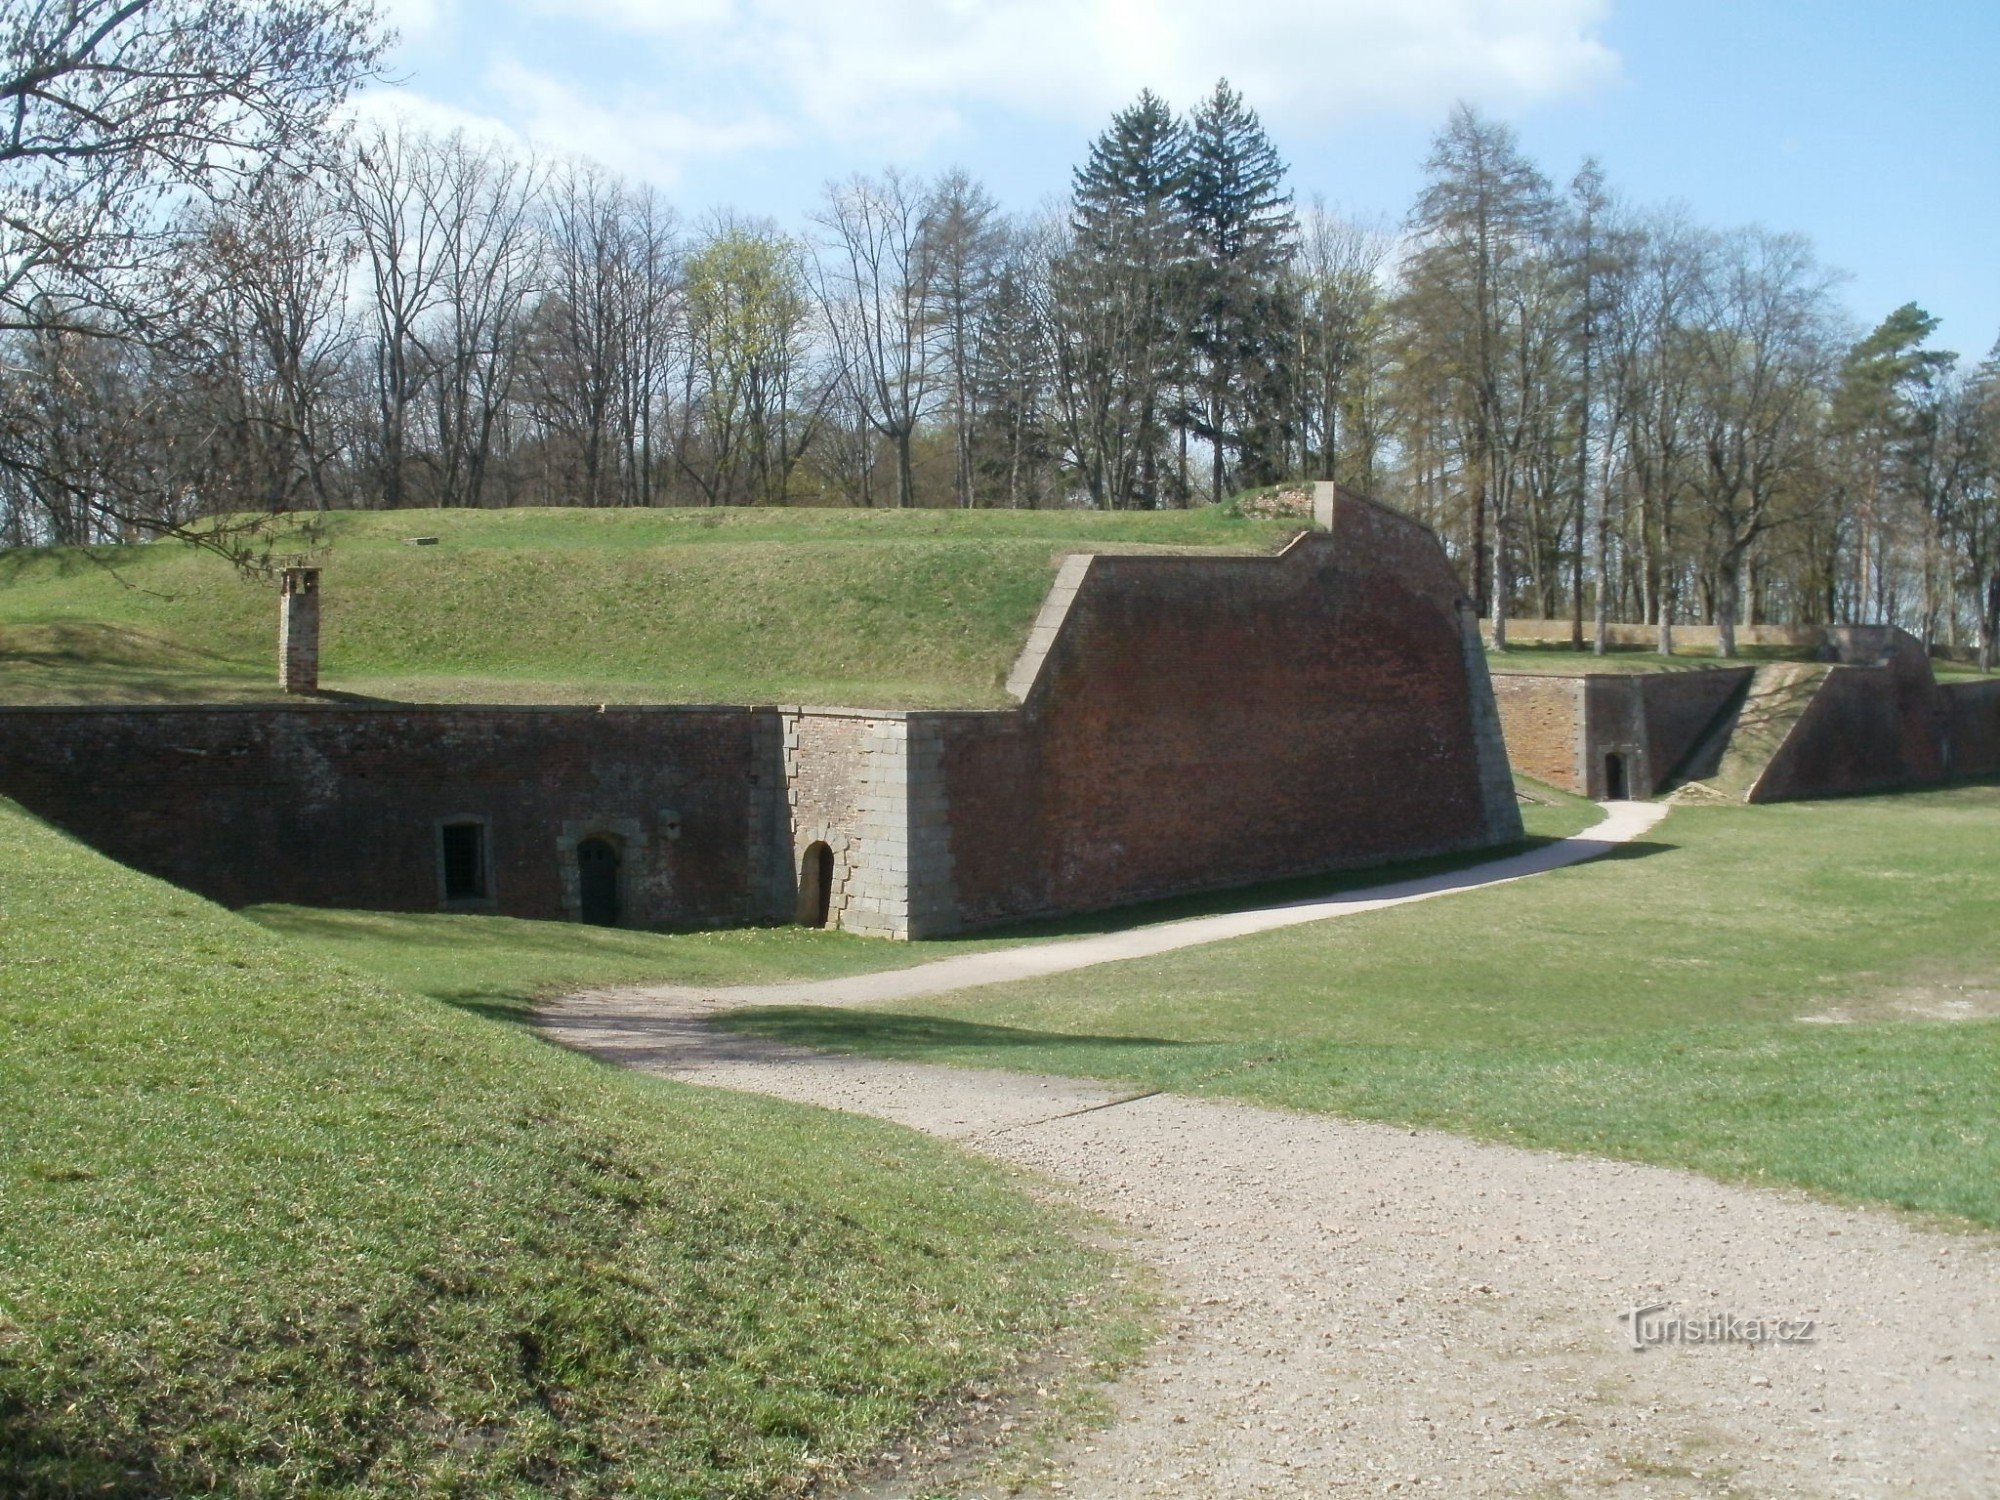 Josefov fortress - at the entrance to the underground